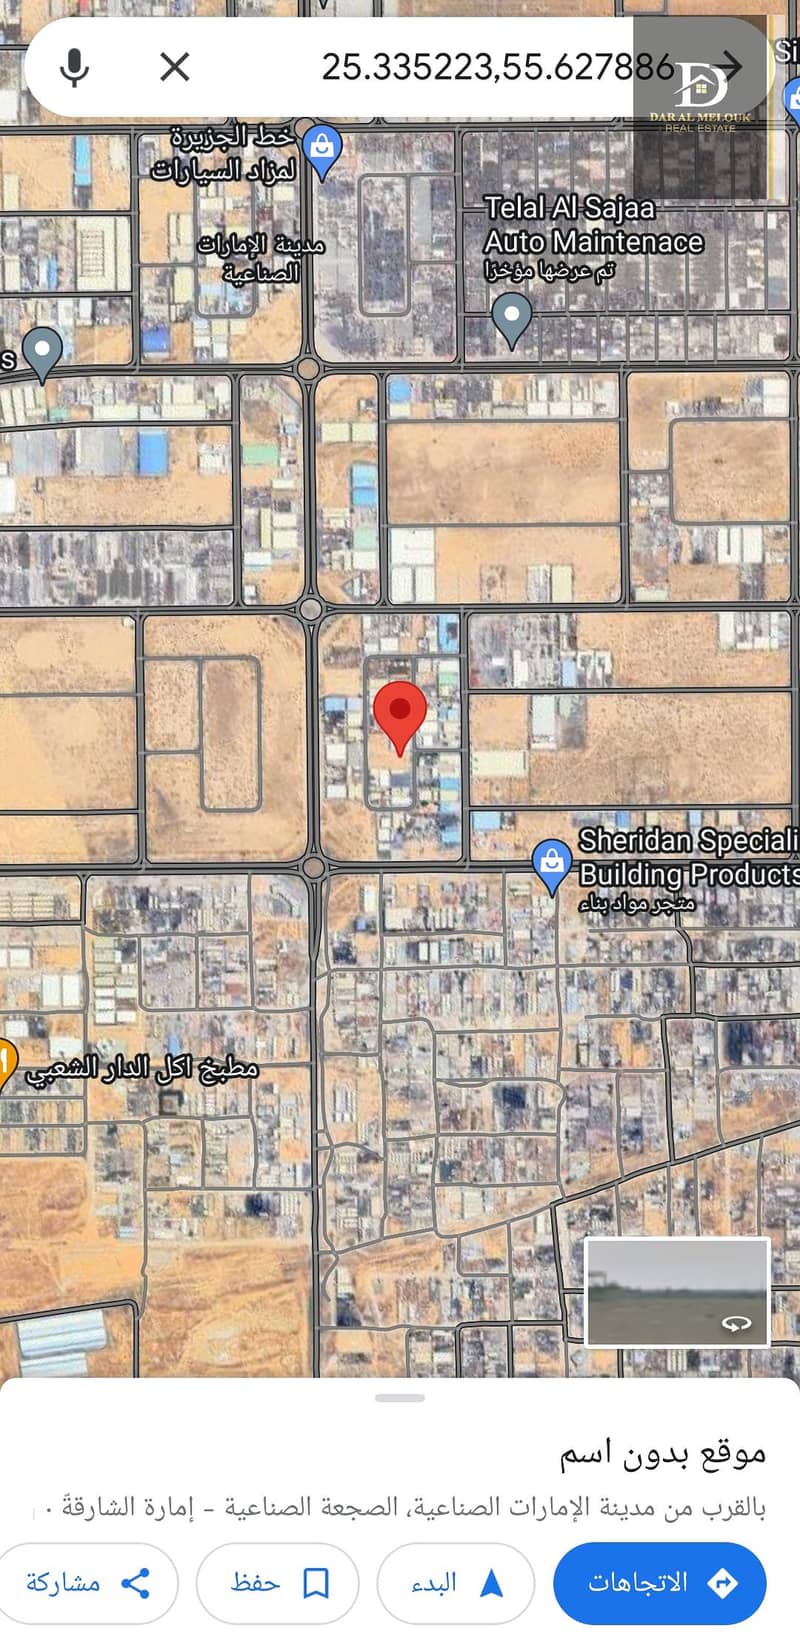 For sale in Sharjah, Al-Saja’a Industrial Area, Al-Hano, new commercial and industrial land, area of ​​30,000 square feet, freehold, all nationalities, excellent location on a neighbor’s street. Price per foot is required: 90 dirhams. We are a real estate